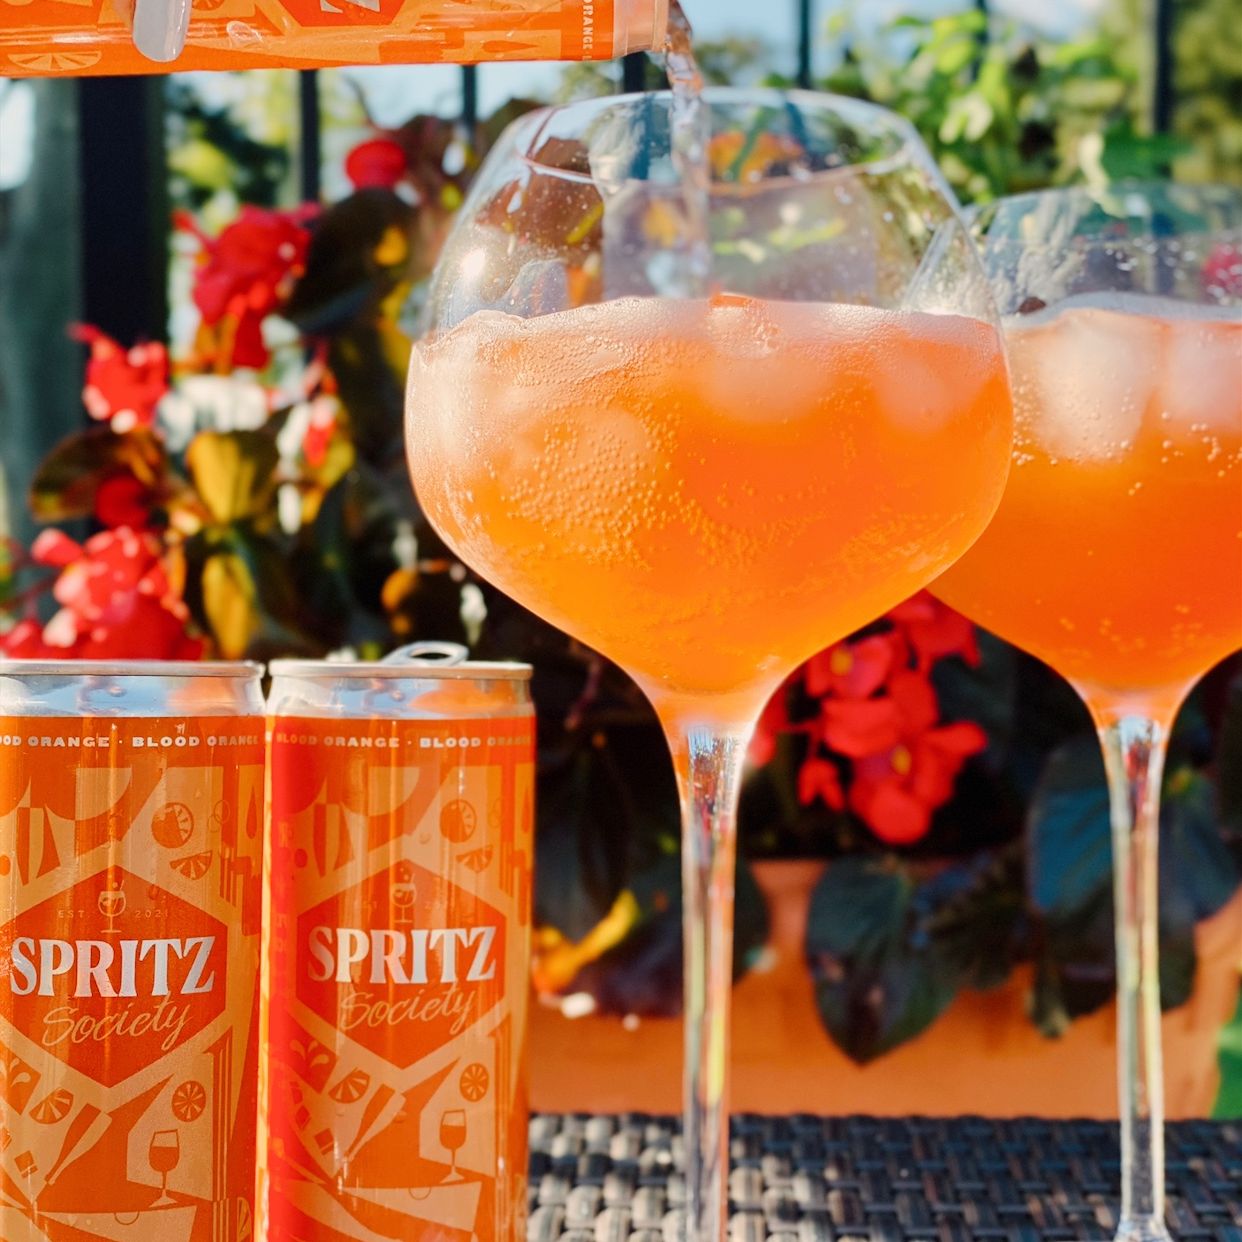 Campaign for Spritz Society